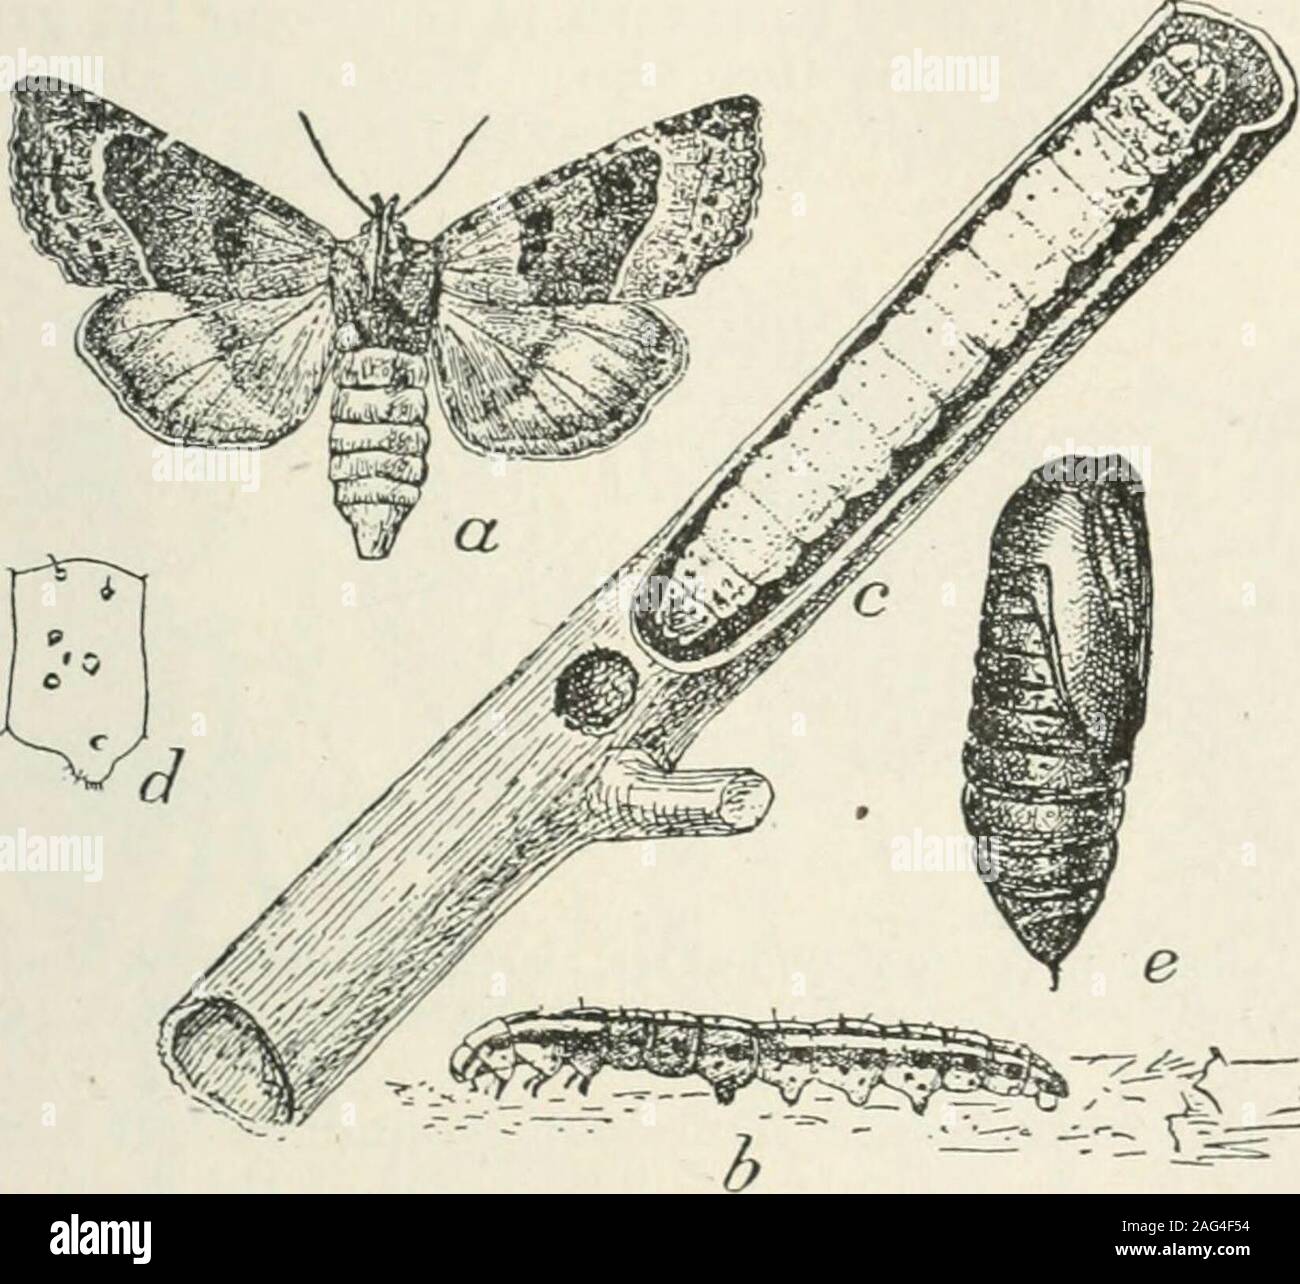 . Ontario Sessional Papers, 1907, No.15-22. , though num-erous, does no appreciable damage in the summer and autumn, as the plantsare then so large and vigorous that the attack is unnoticed. 1906 ENTOMOLOGICAL SOCIETY. 49 The root and stalk borers (Gortyna nitela—fig. 11—and cataphracta)were much complained of this year. The former was found in potato stems,and the latter was reported by Mr. C. W. Nash, of Toronto, as attackingall kinds of perennial plants in gardens, and also corn and tomatoes. Itis difficult to prescribe any remedy for these insects, as they work out ofsight and their presen Stock Photo